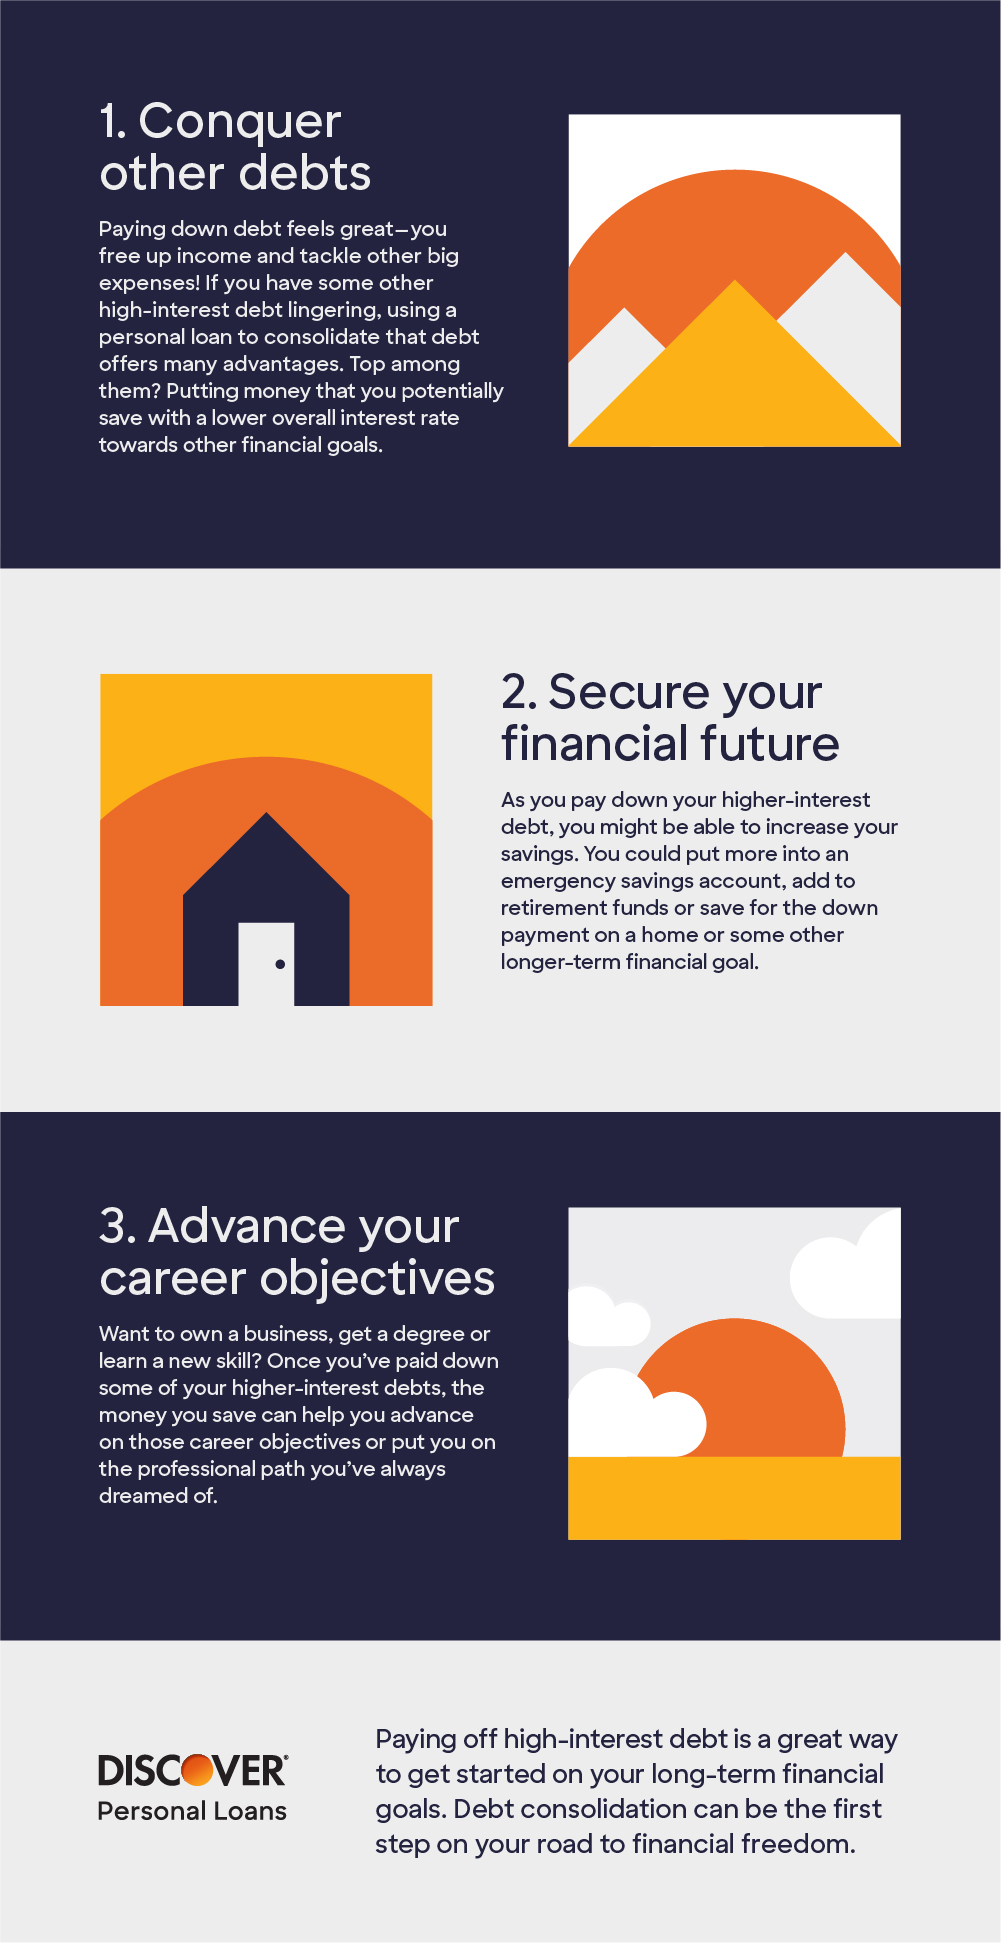 Discover Personal Loans- What to Do After Paying Off Debt Infographic